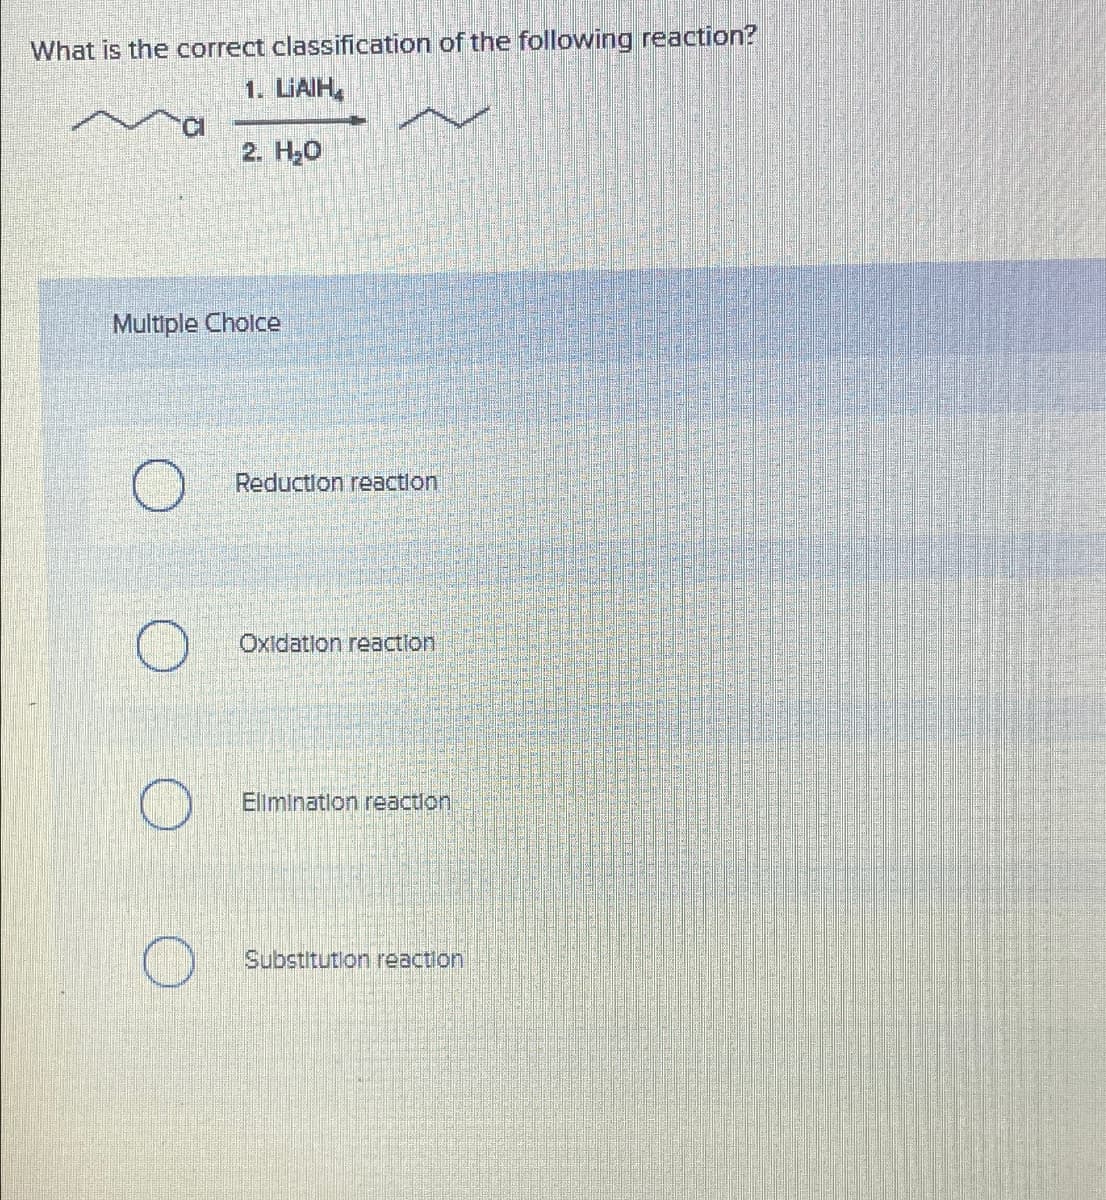 What is the correct classification of the following reaction?
1. LIAIH
2. H₂O
Multiple Choice
Reduction reaction
Oxidation reaction
Elimination reaction
Substitution reaction